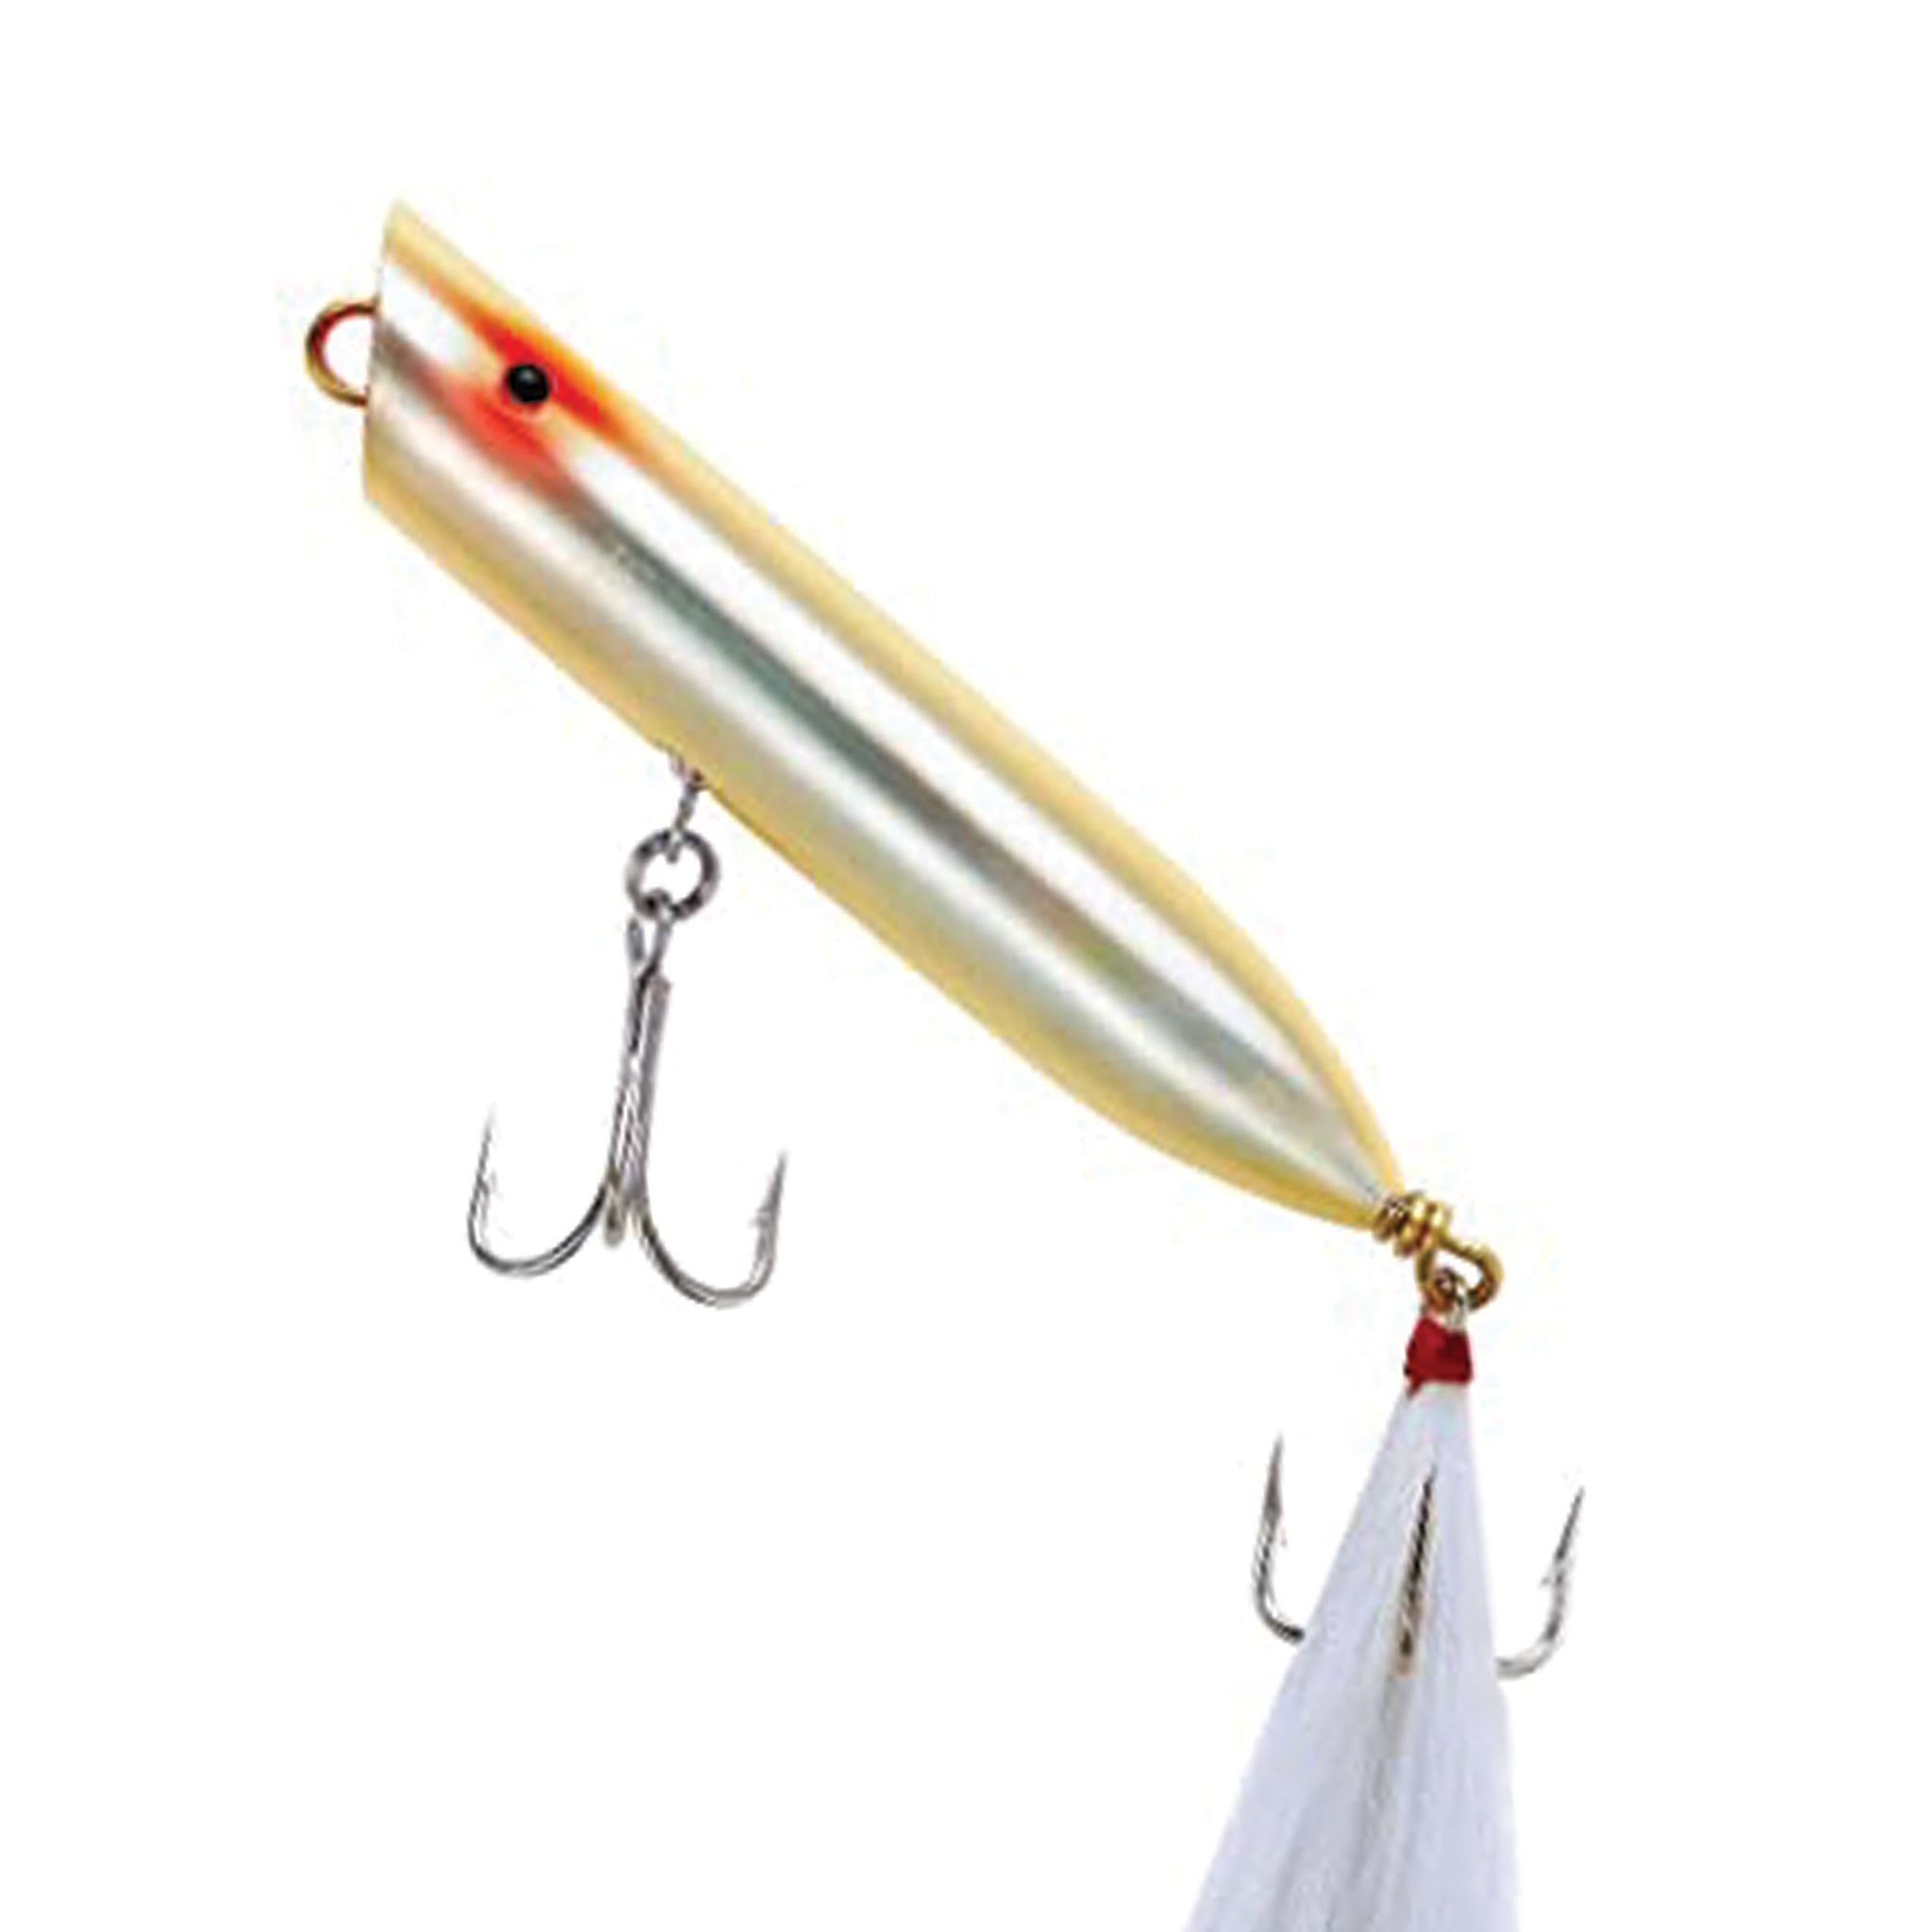  Creek Chub 6 Pin Popper Lures, Funny Bone, 6.5-Inch : Fishing  Topwater Lures And Crankbaits : Sports & Outdoors